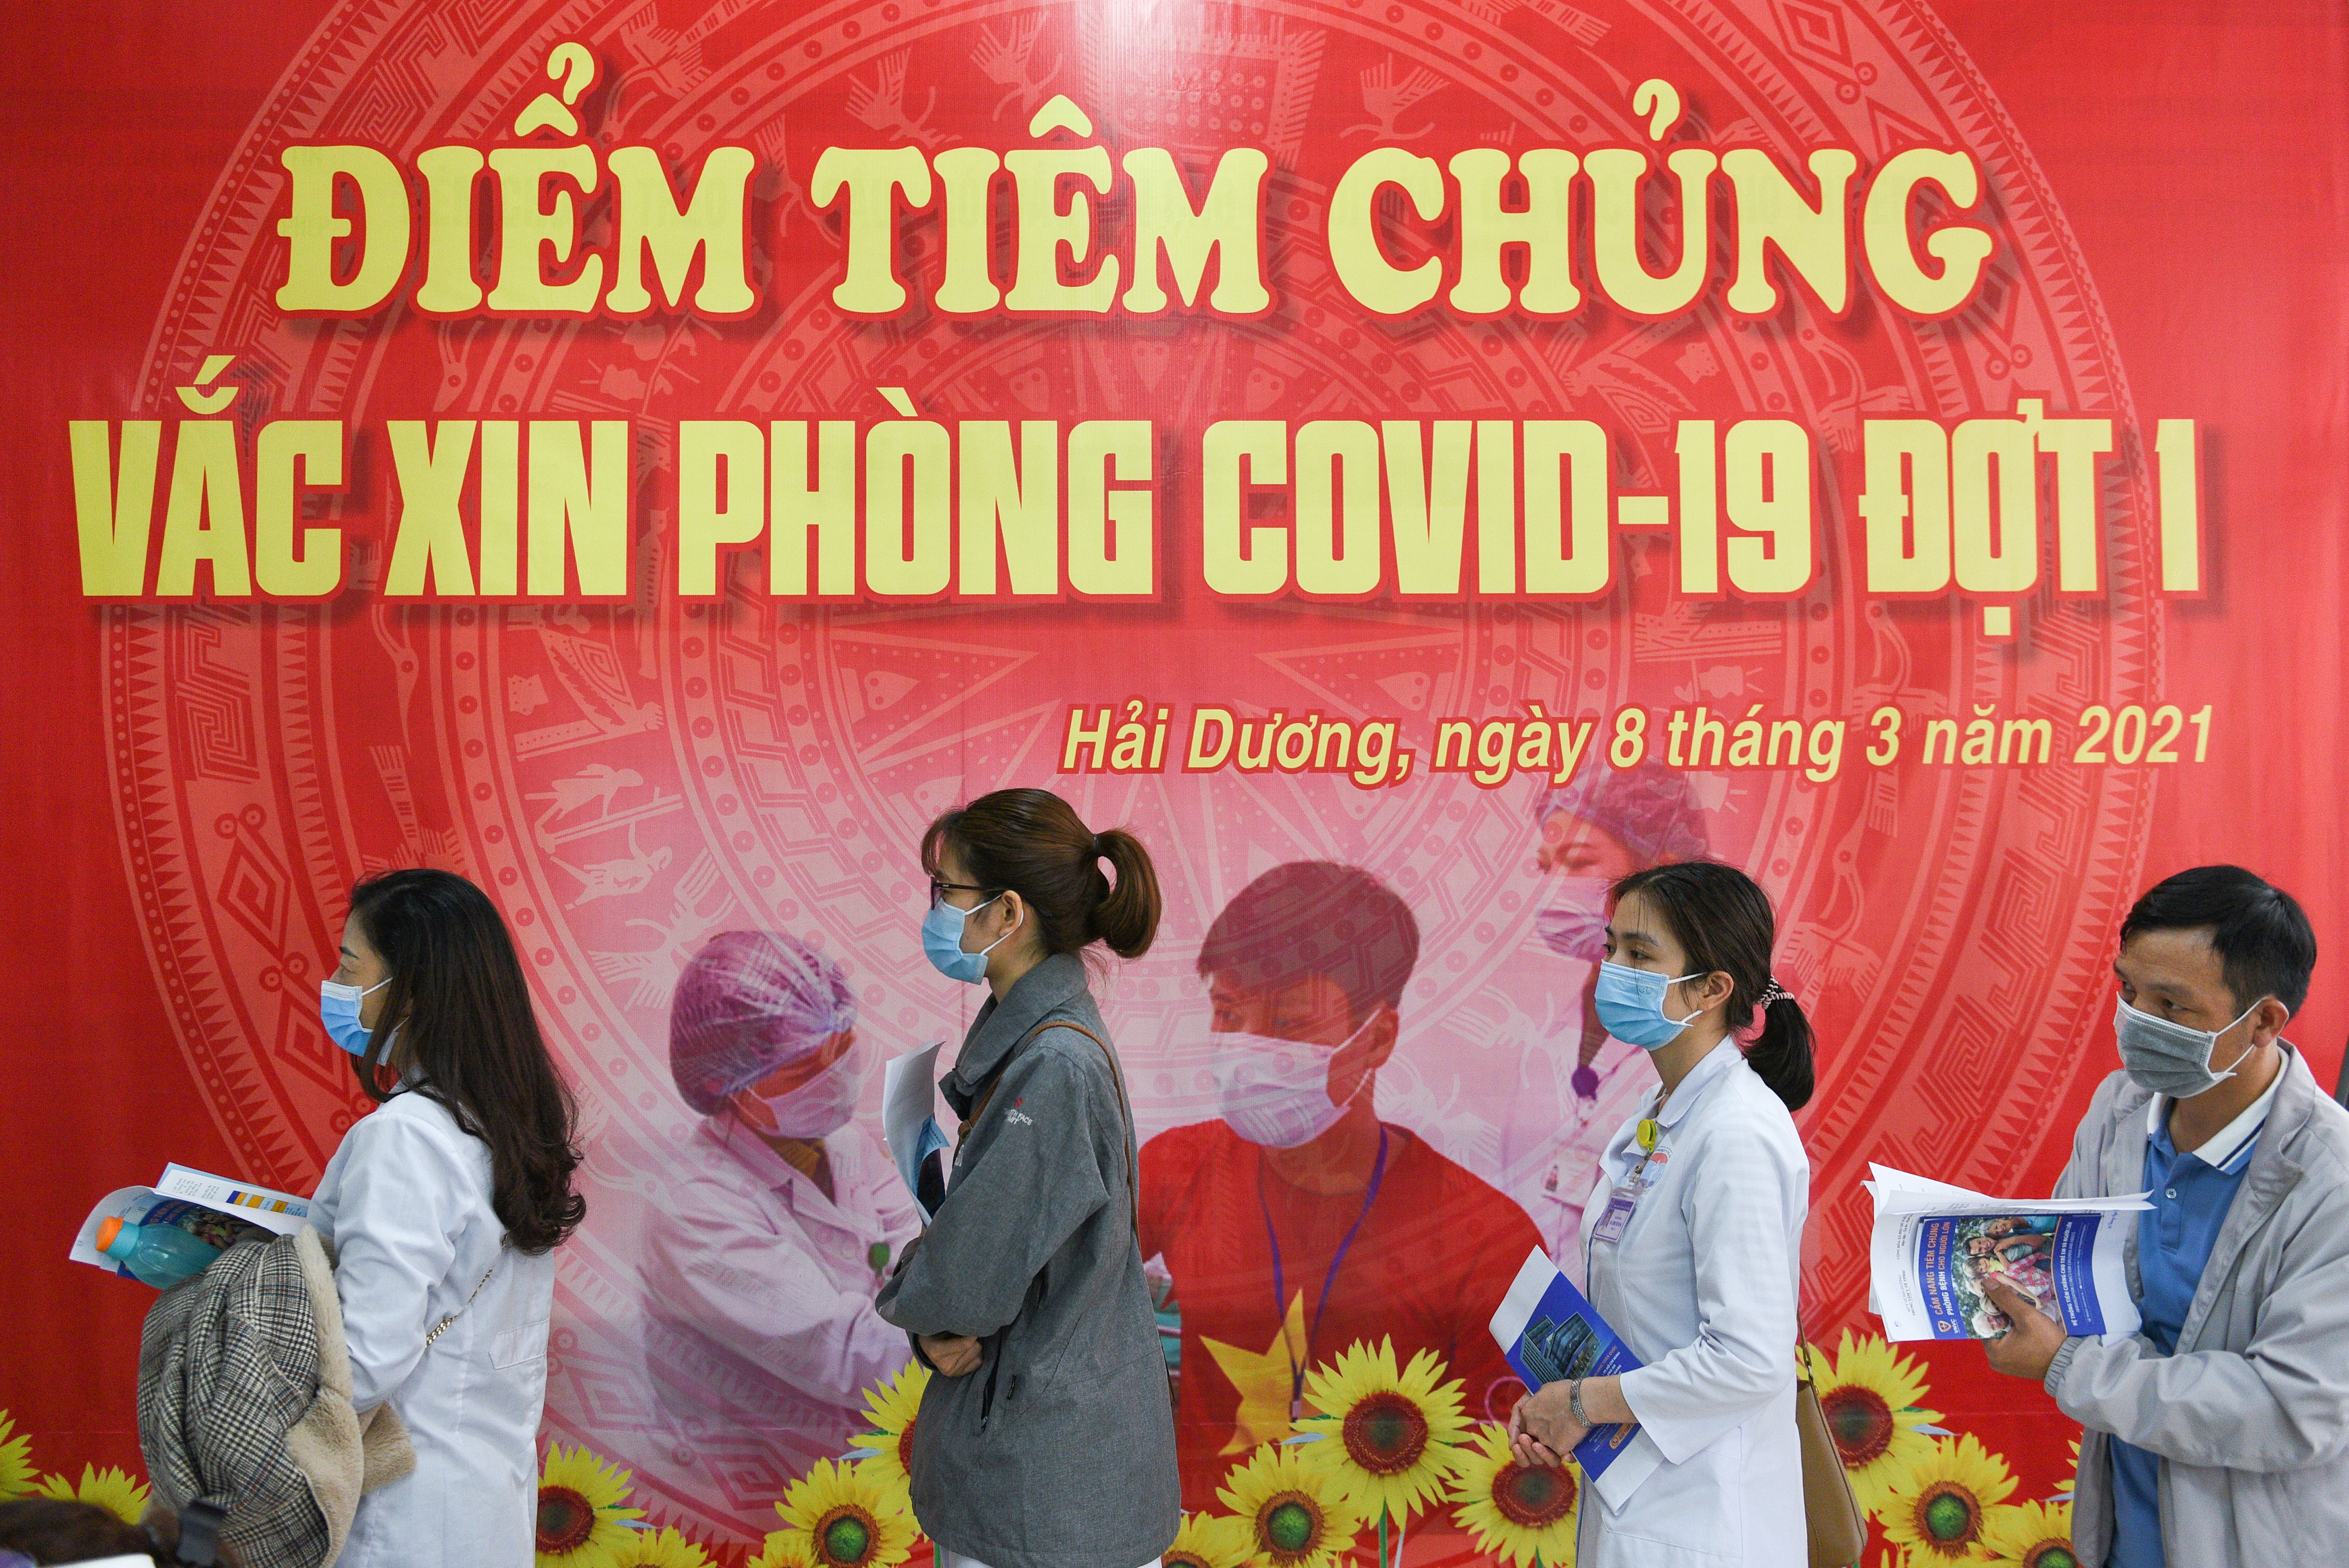 Health workers wait for their turn as Vietnam starts its official rollout of AstraZeneca's COVID-19 vaccine, in Hai Duong